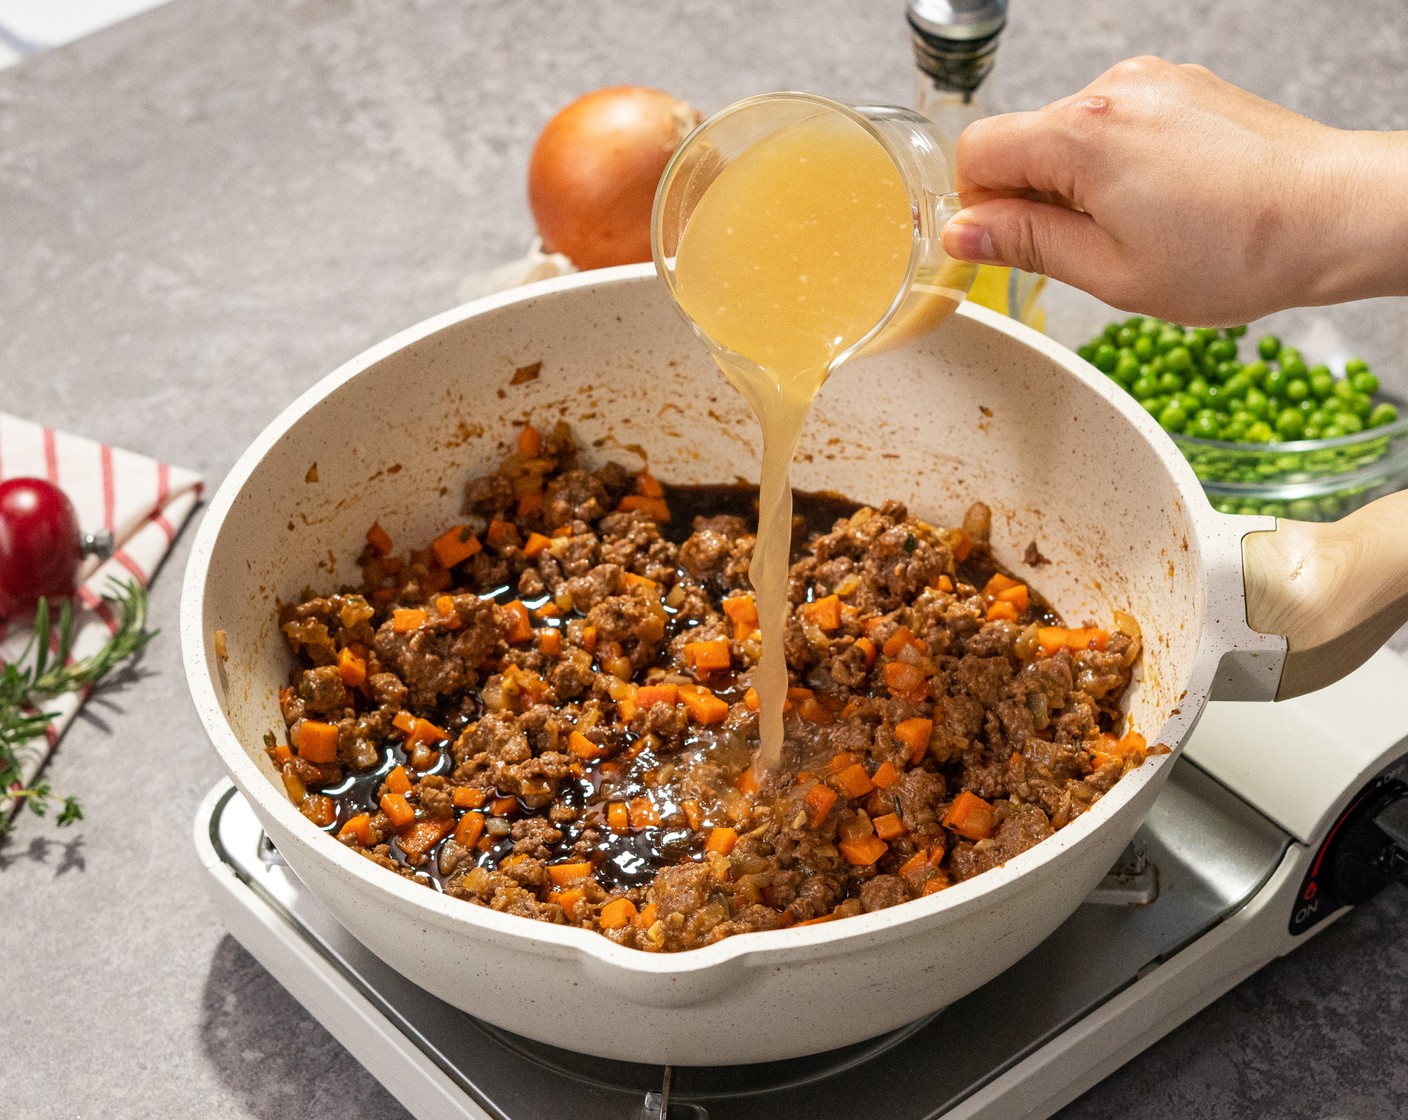 step 7 Add Stout Beer (1/2 cup), Beef Stock (1 cup), and Green Peas (3/4 cup). Reduce to low heat to simmer and cook until thickened. Stirring occasionally. Then season with Salt (1 tsp) and Ground Black Pepper (1 tsp).